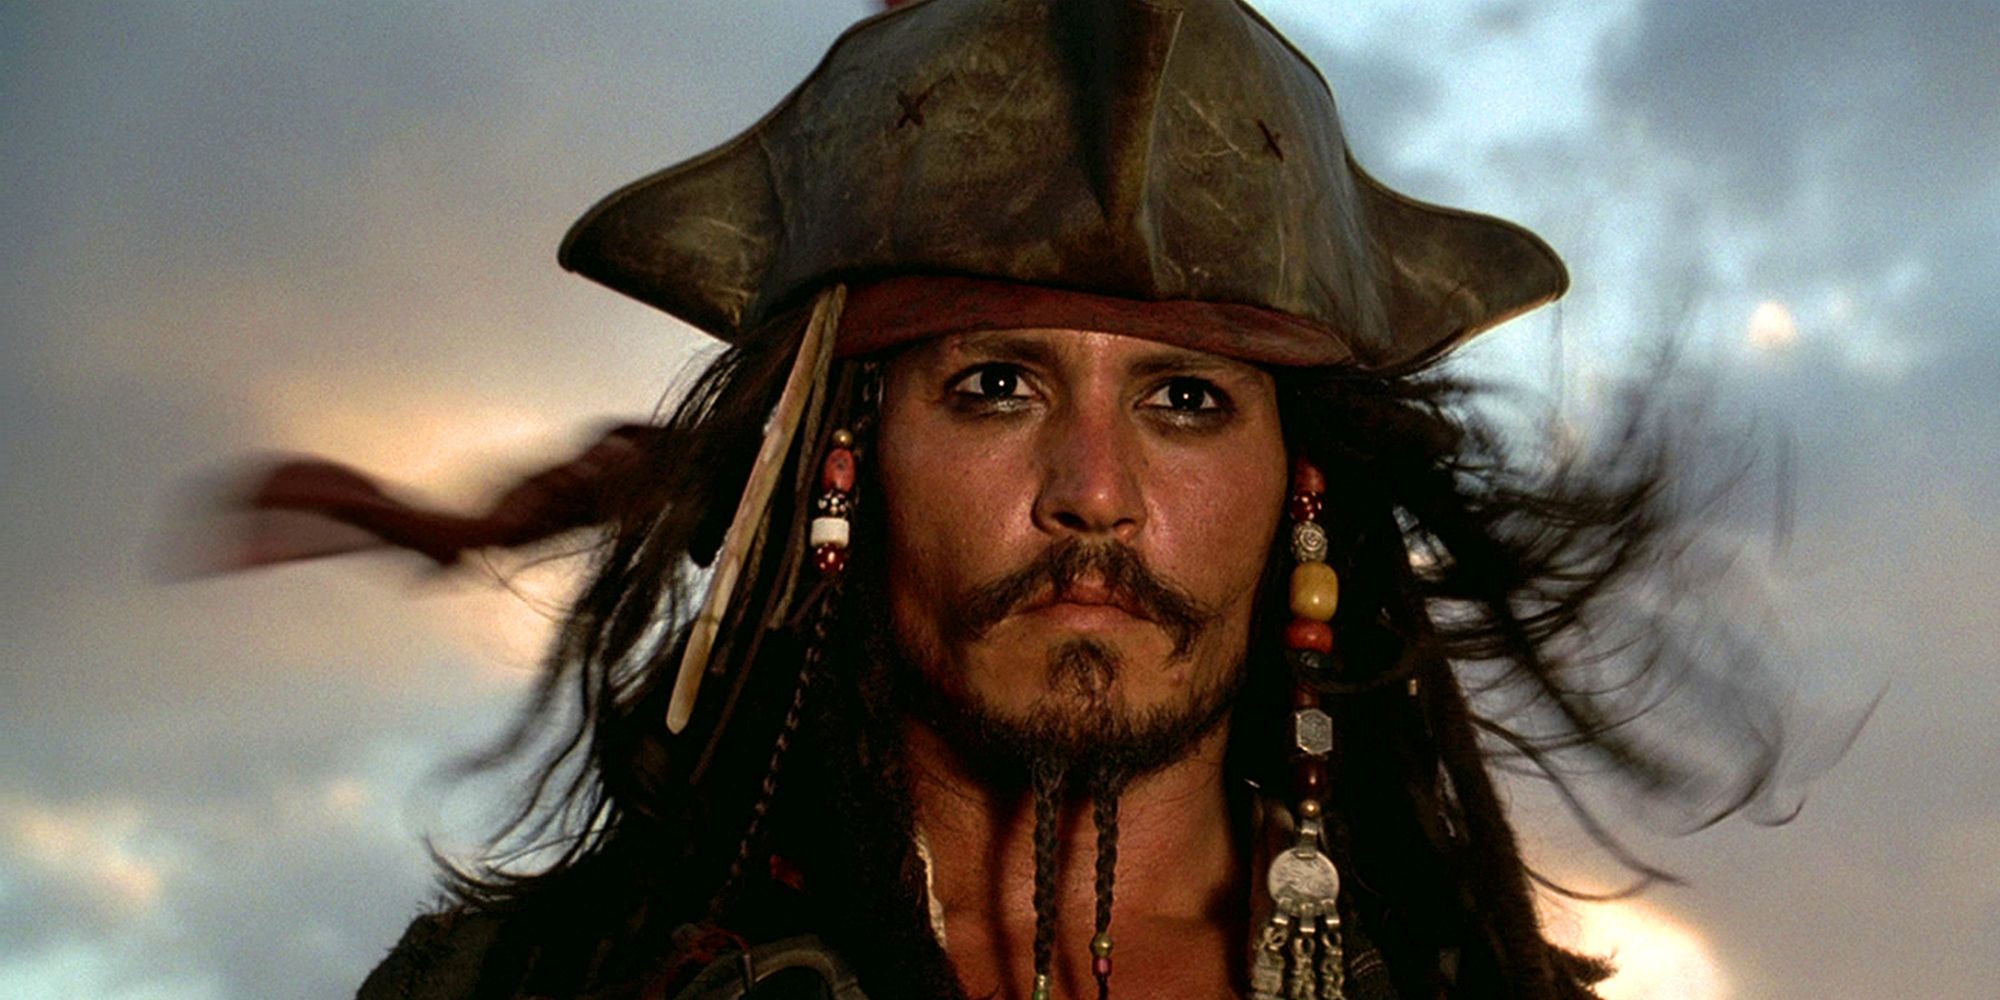 Captain Jack Sparrow standing at the mast of his ship in Pirates of the Caribbean